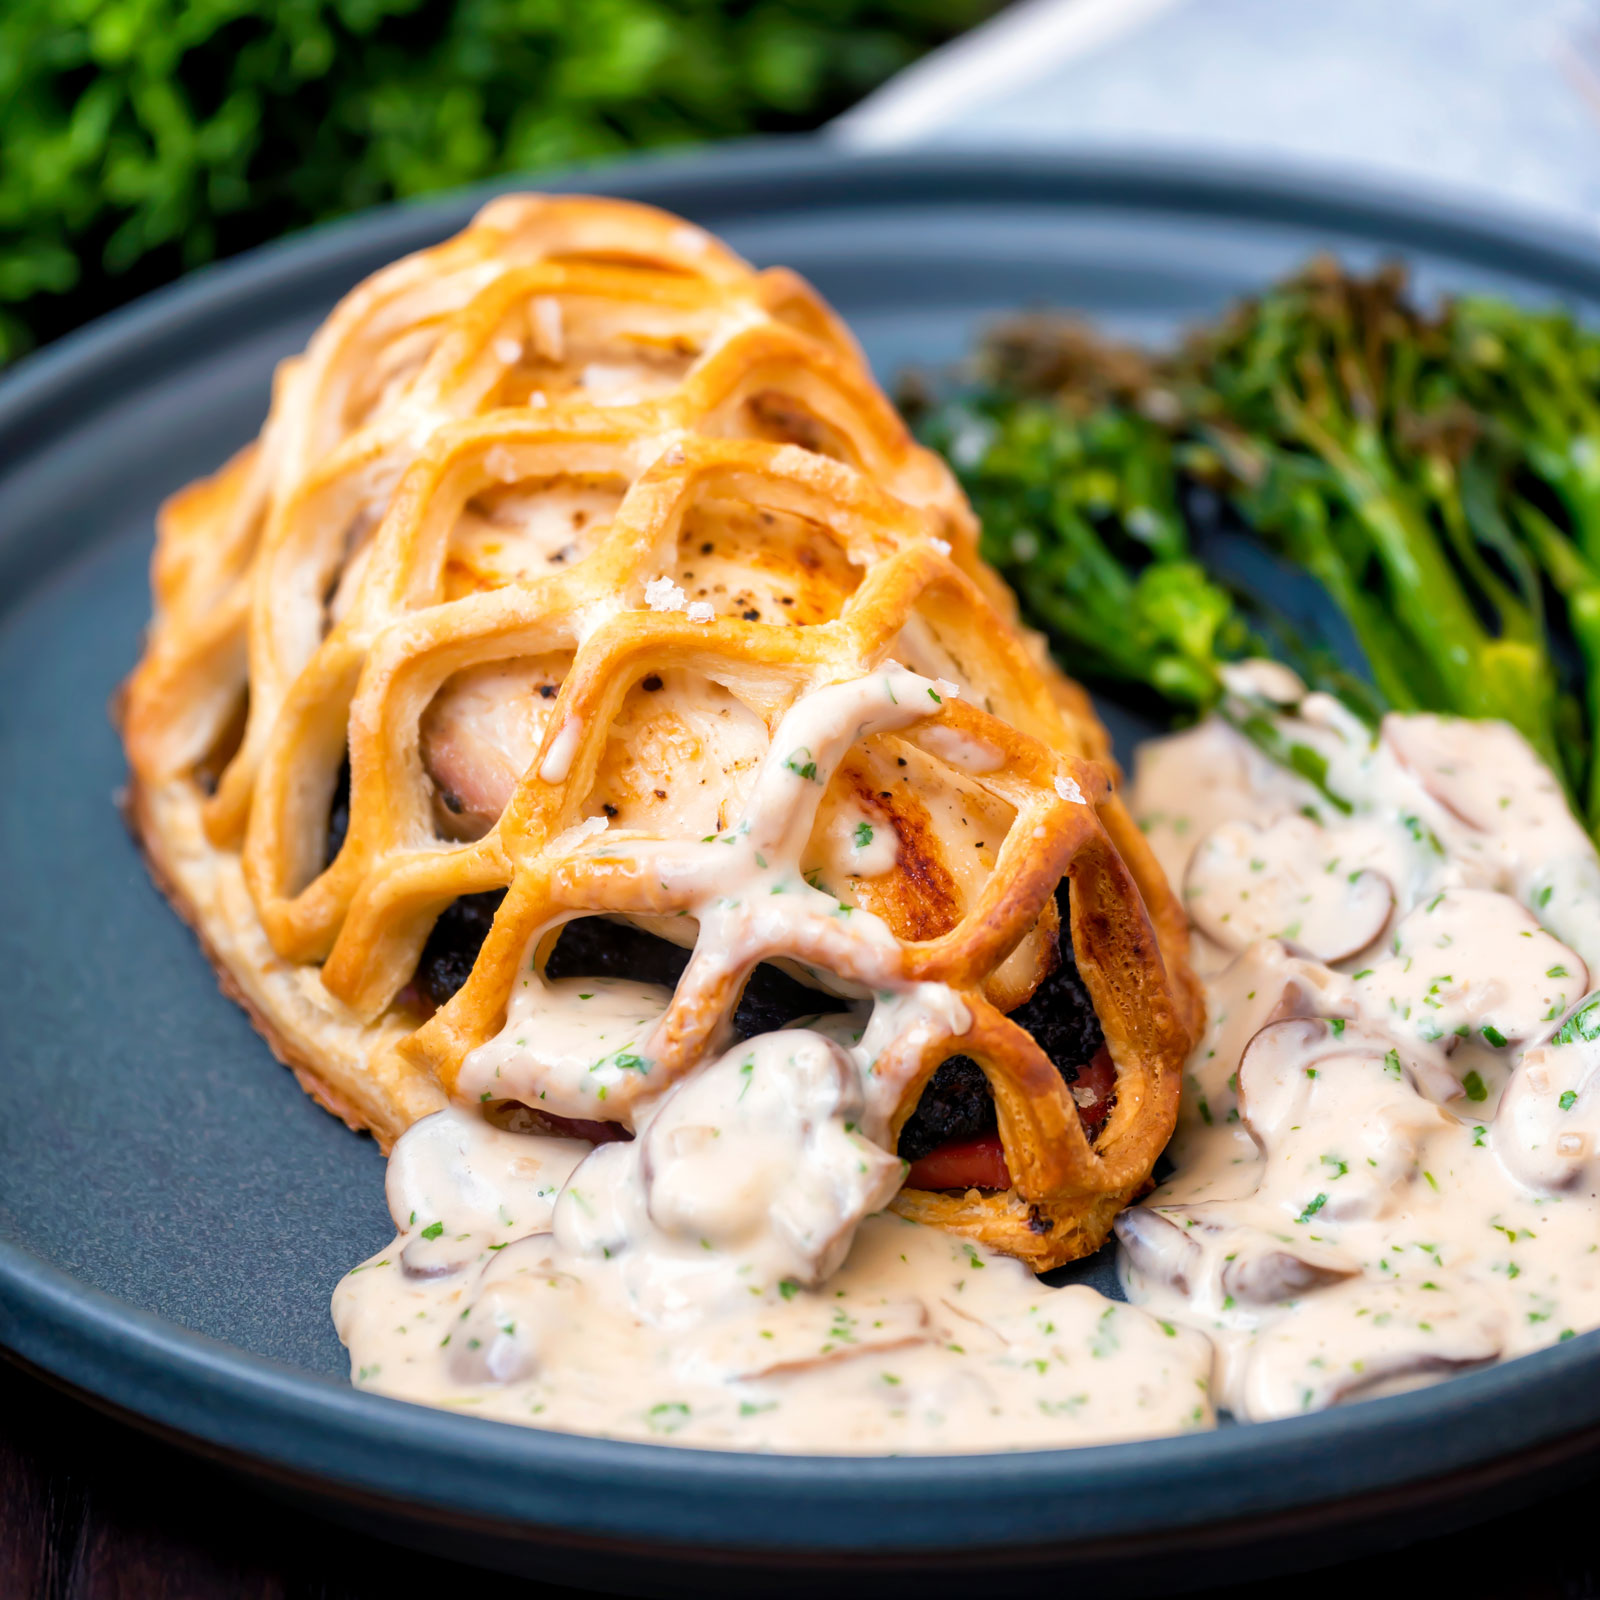 Chicken en croute served with a mushroom cream sauce and roasted tenderstem broccoli.